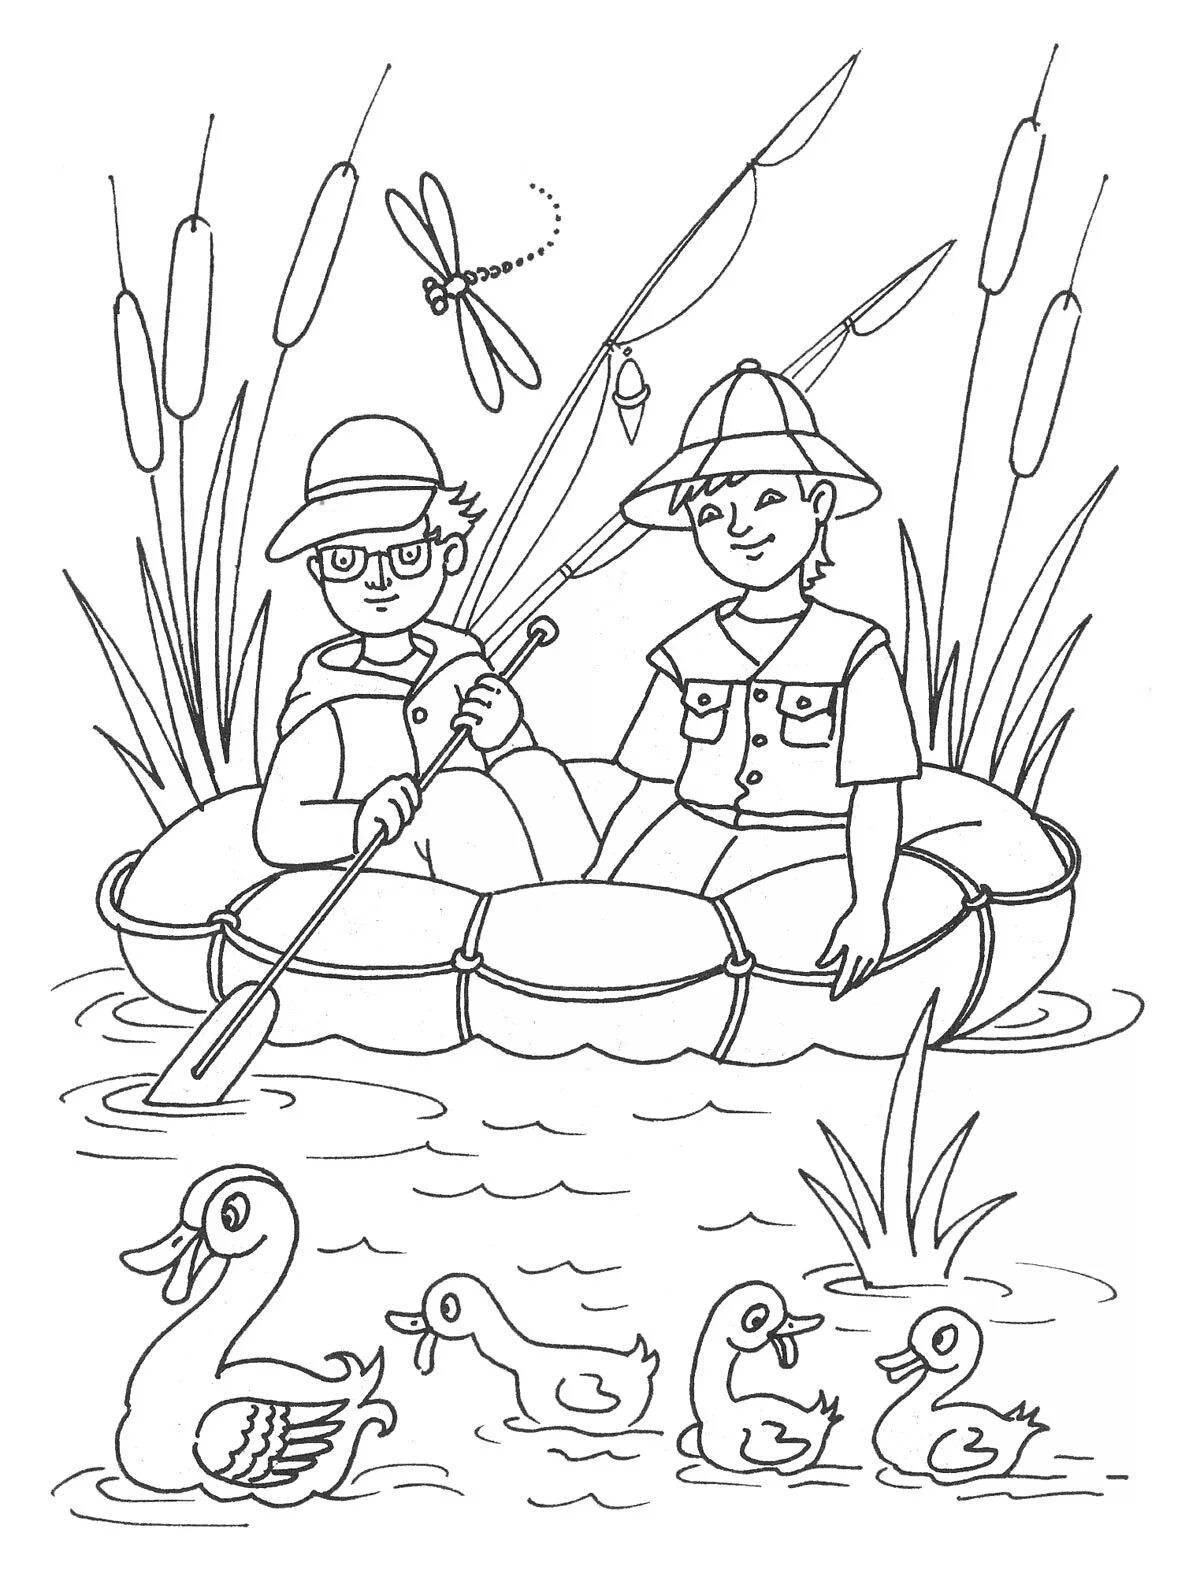 Awesome summer coloring book